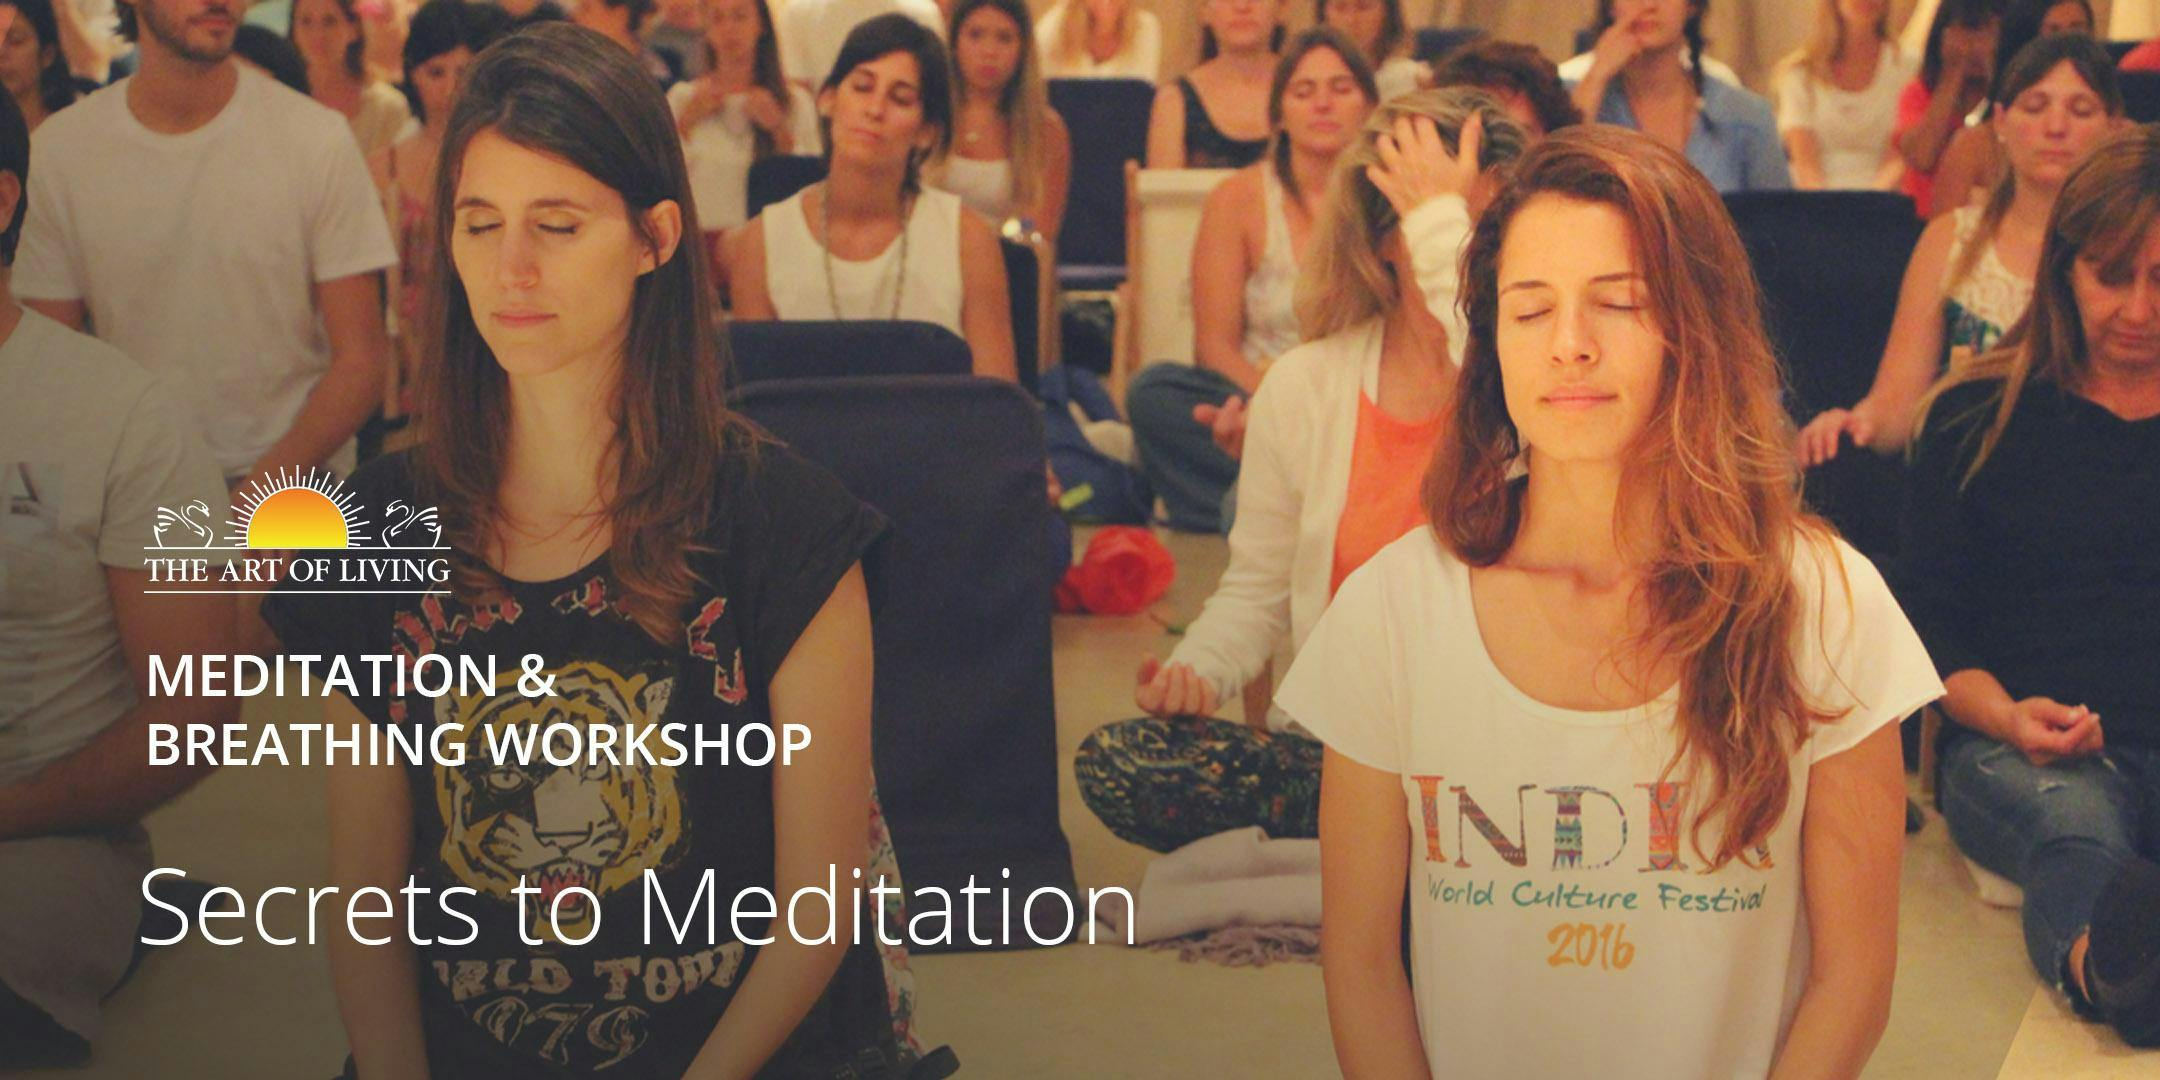 Secrets to Meditation in Dubai: an introduction to the Happiness Program